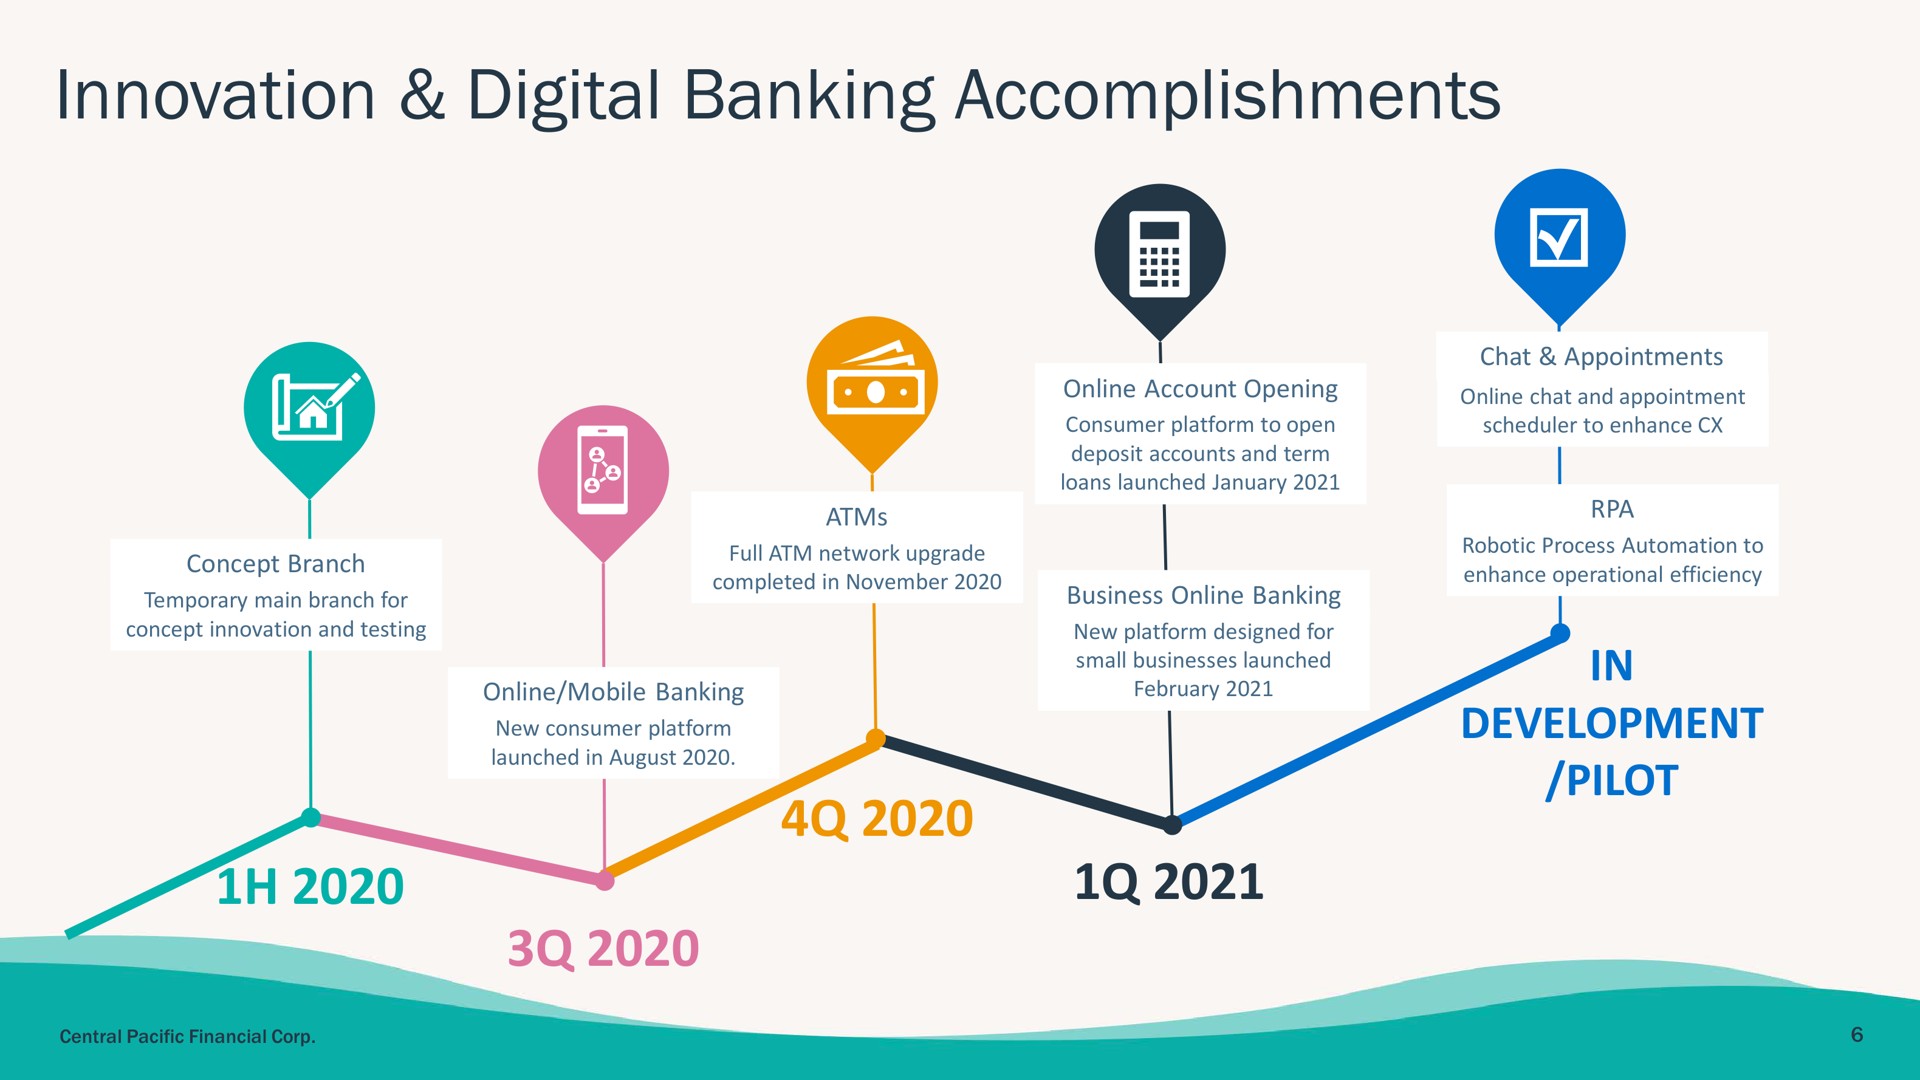 innovation digital banking accomplishments in development pilot | Central Pacific Financial